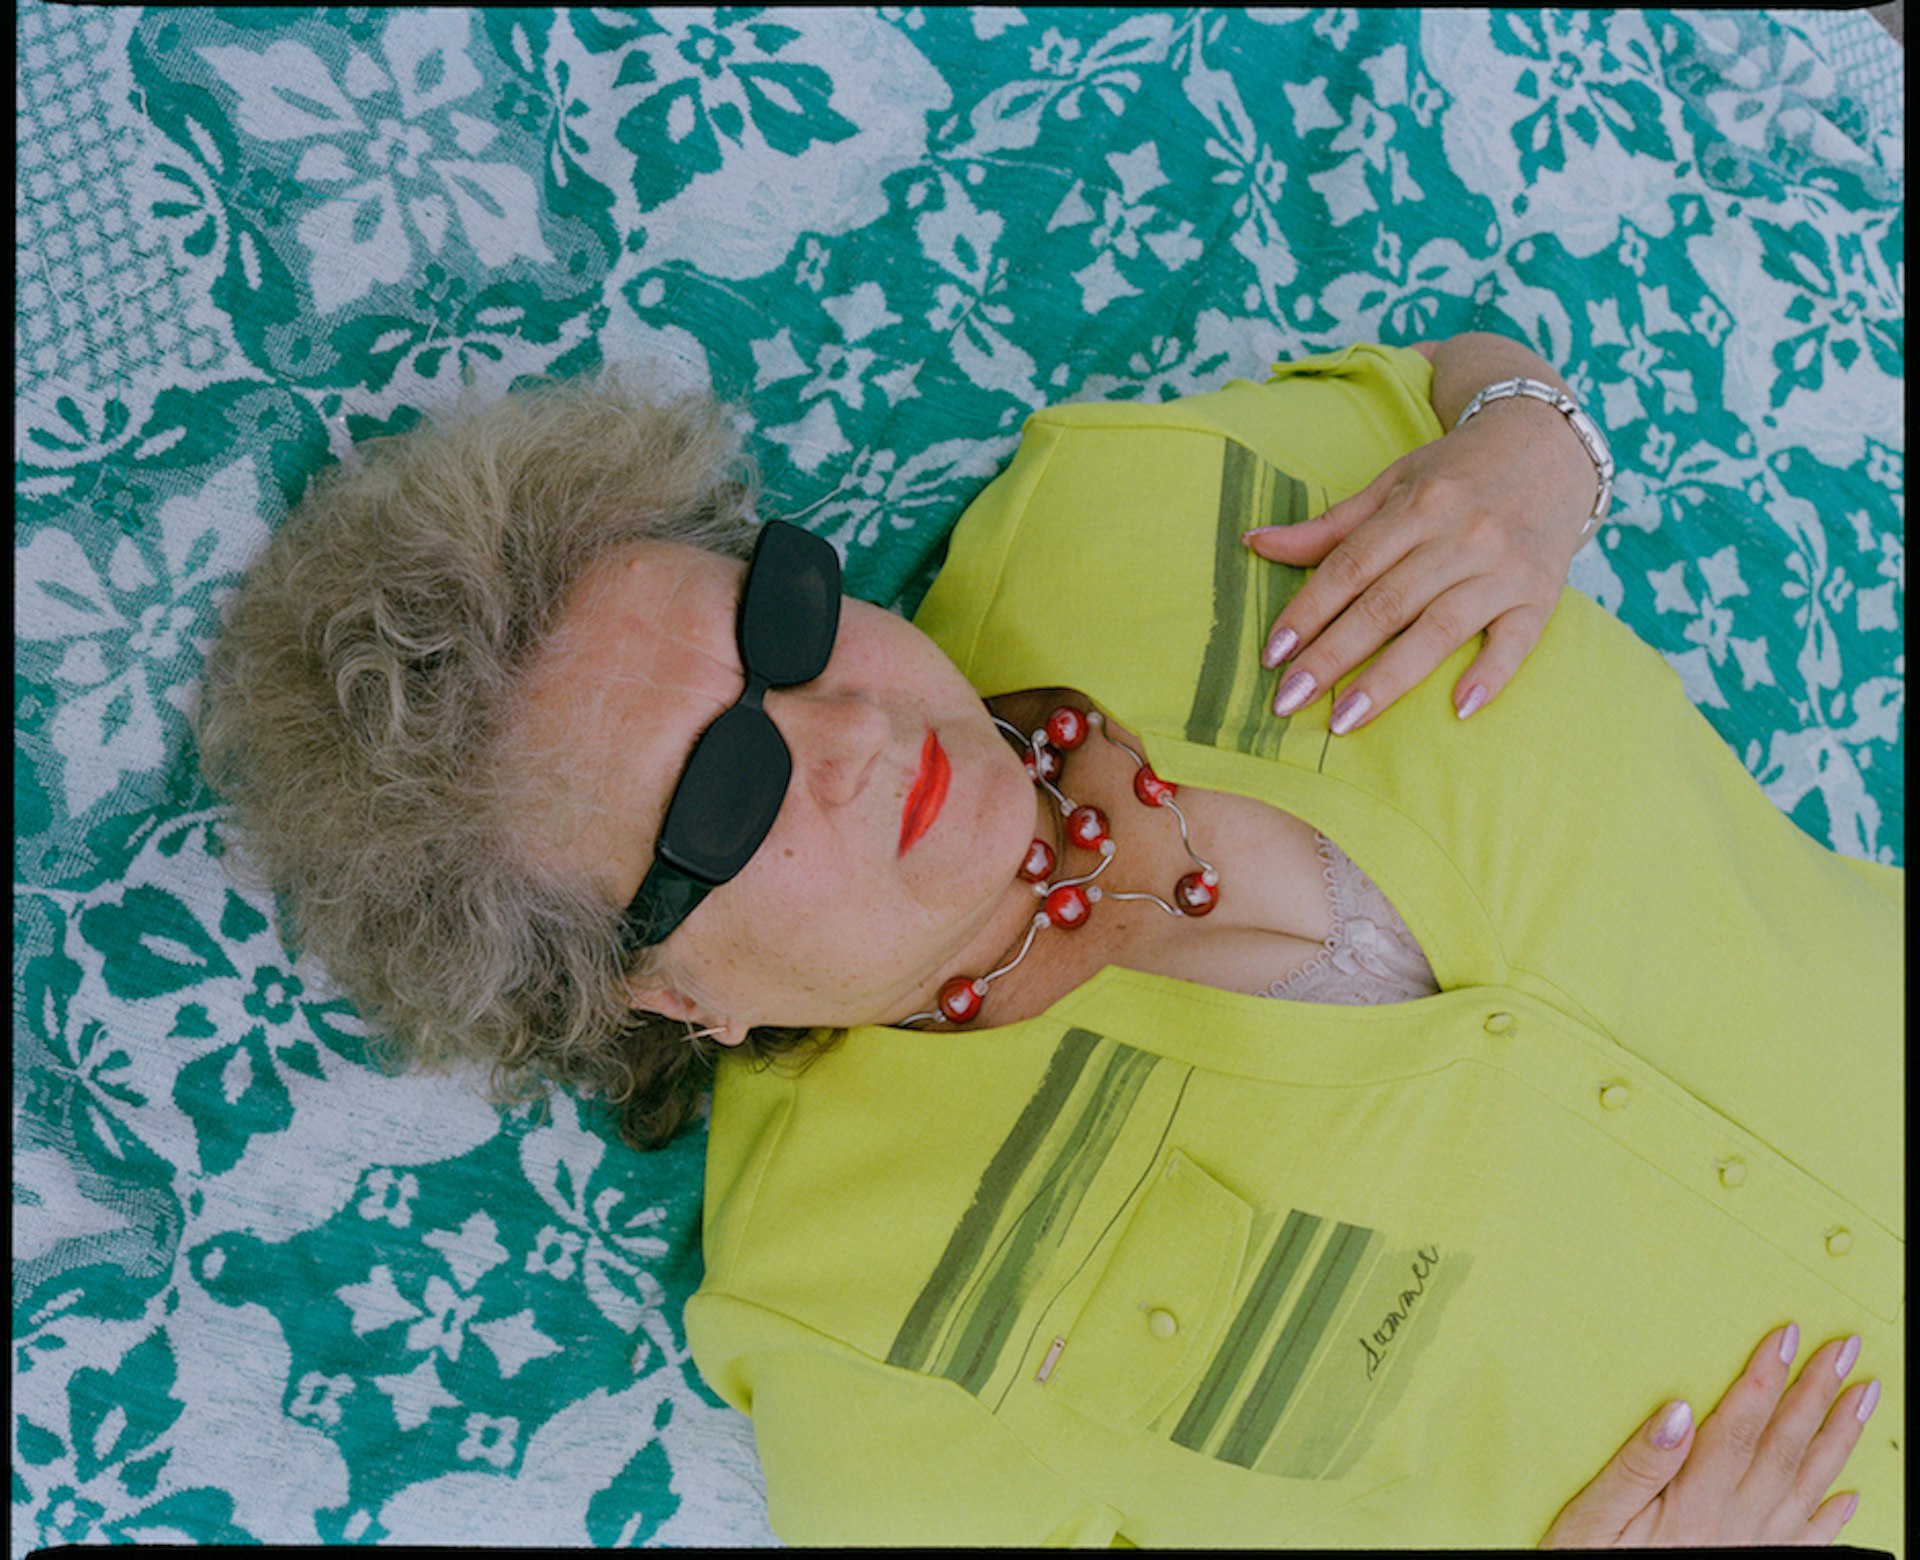 A photographer’s colourful ode to her grandma in Russia